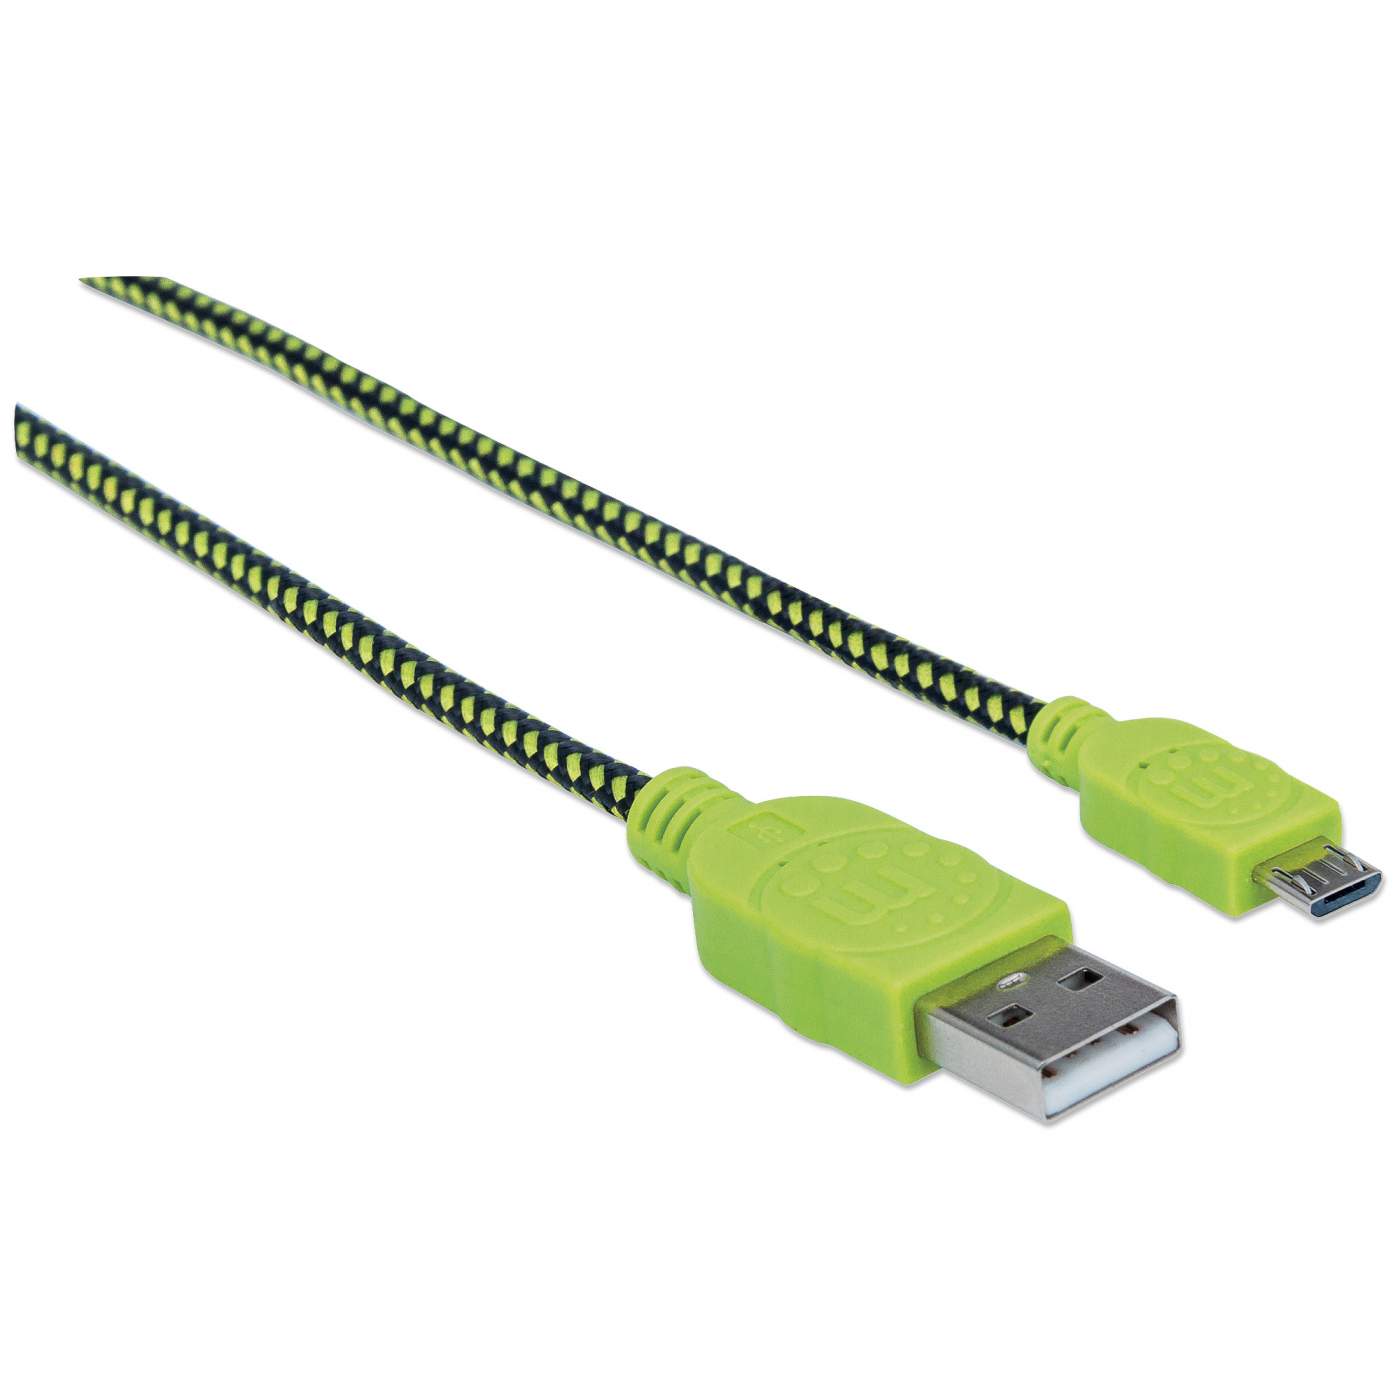 Braided Hi-Speed USB Micro-B Device Cable Image 3